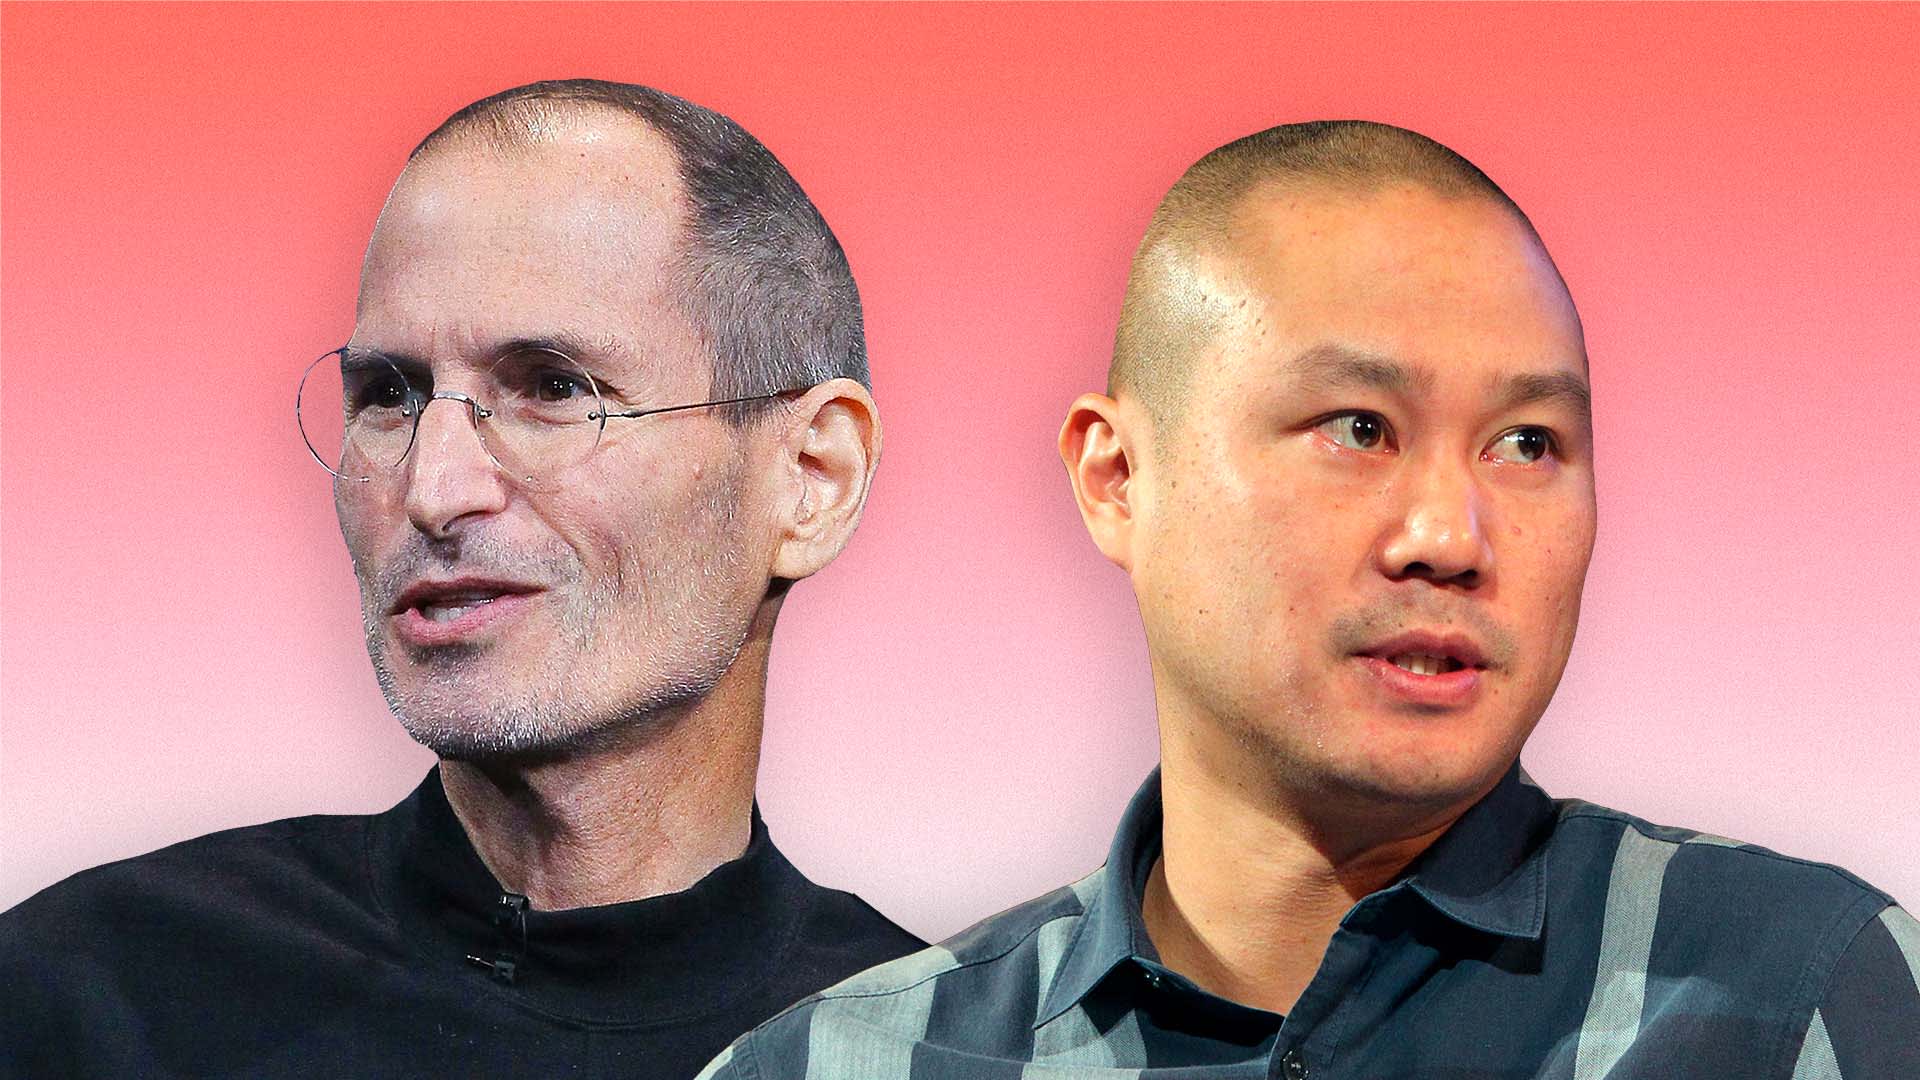 Steve Jobs, Tony Hsieh and How Supernatural Leadership Really Works